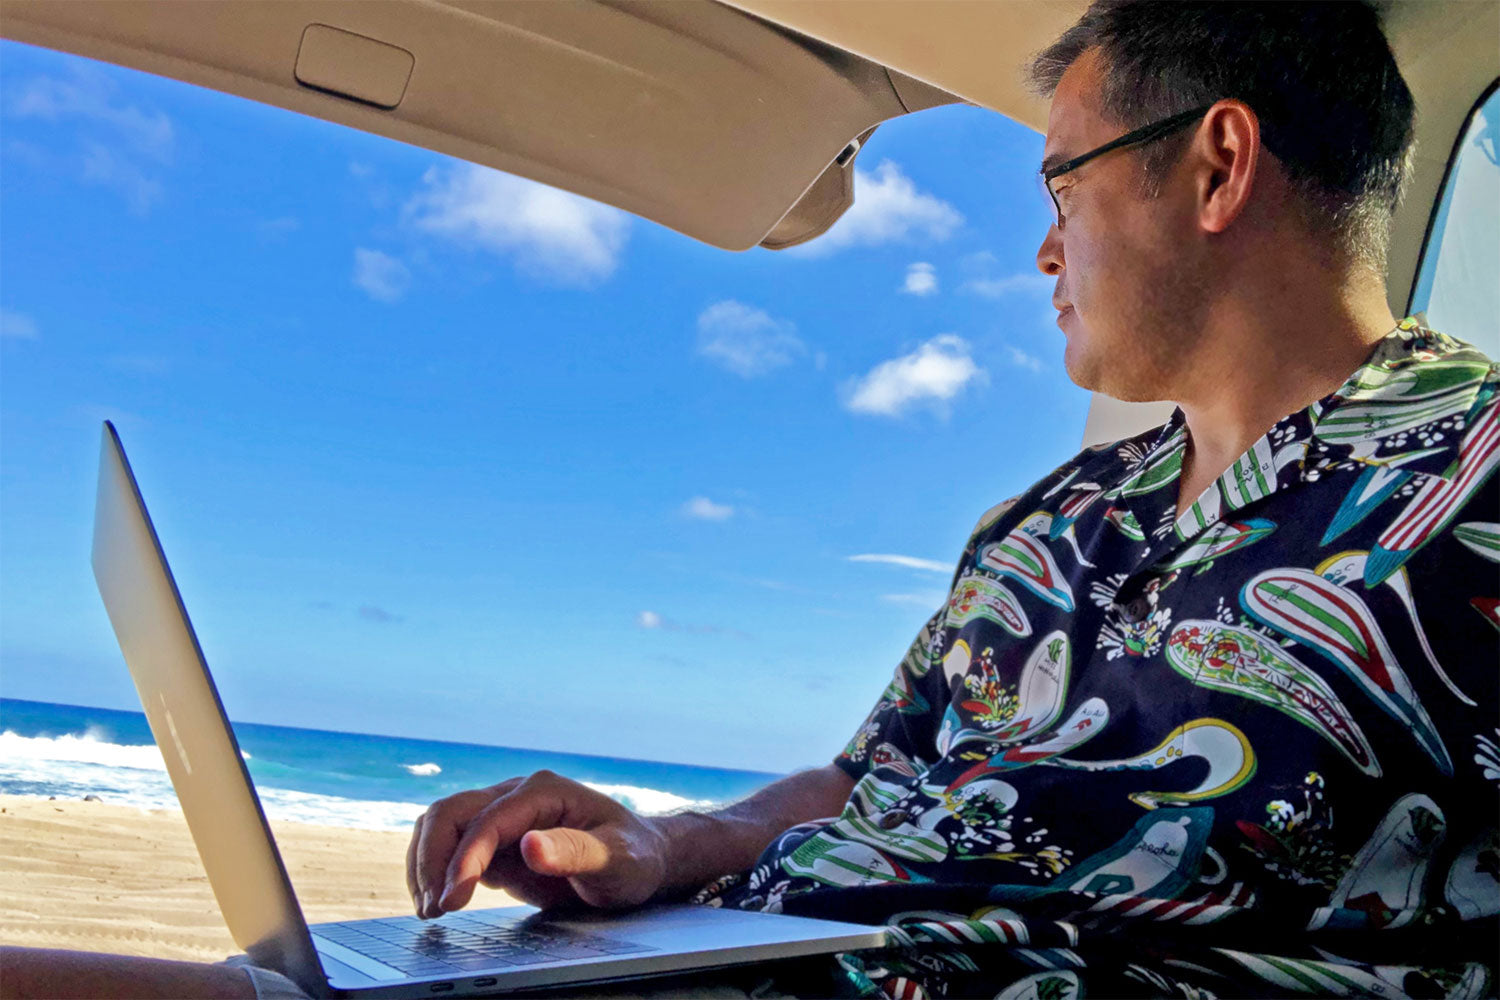 telecomuting on a laptop in the back of an SUV on the beach in a Hawaiian shirt